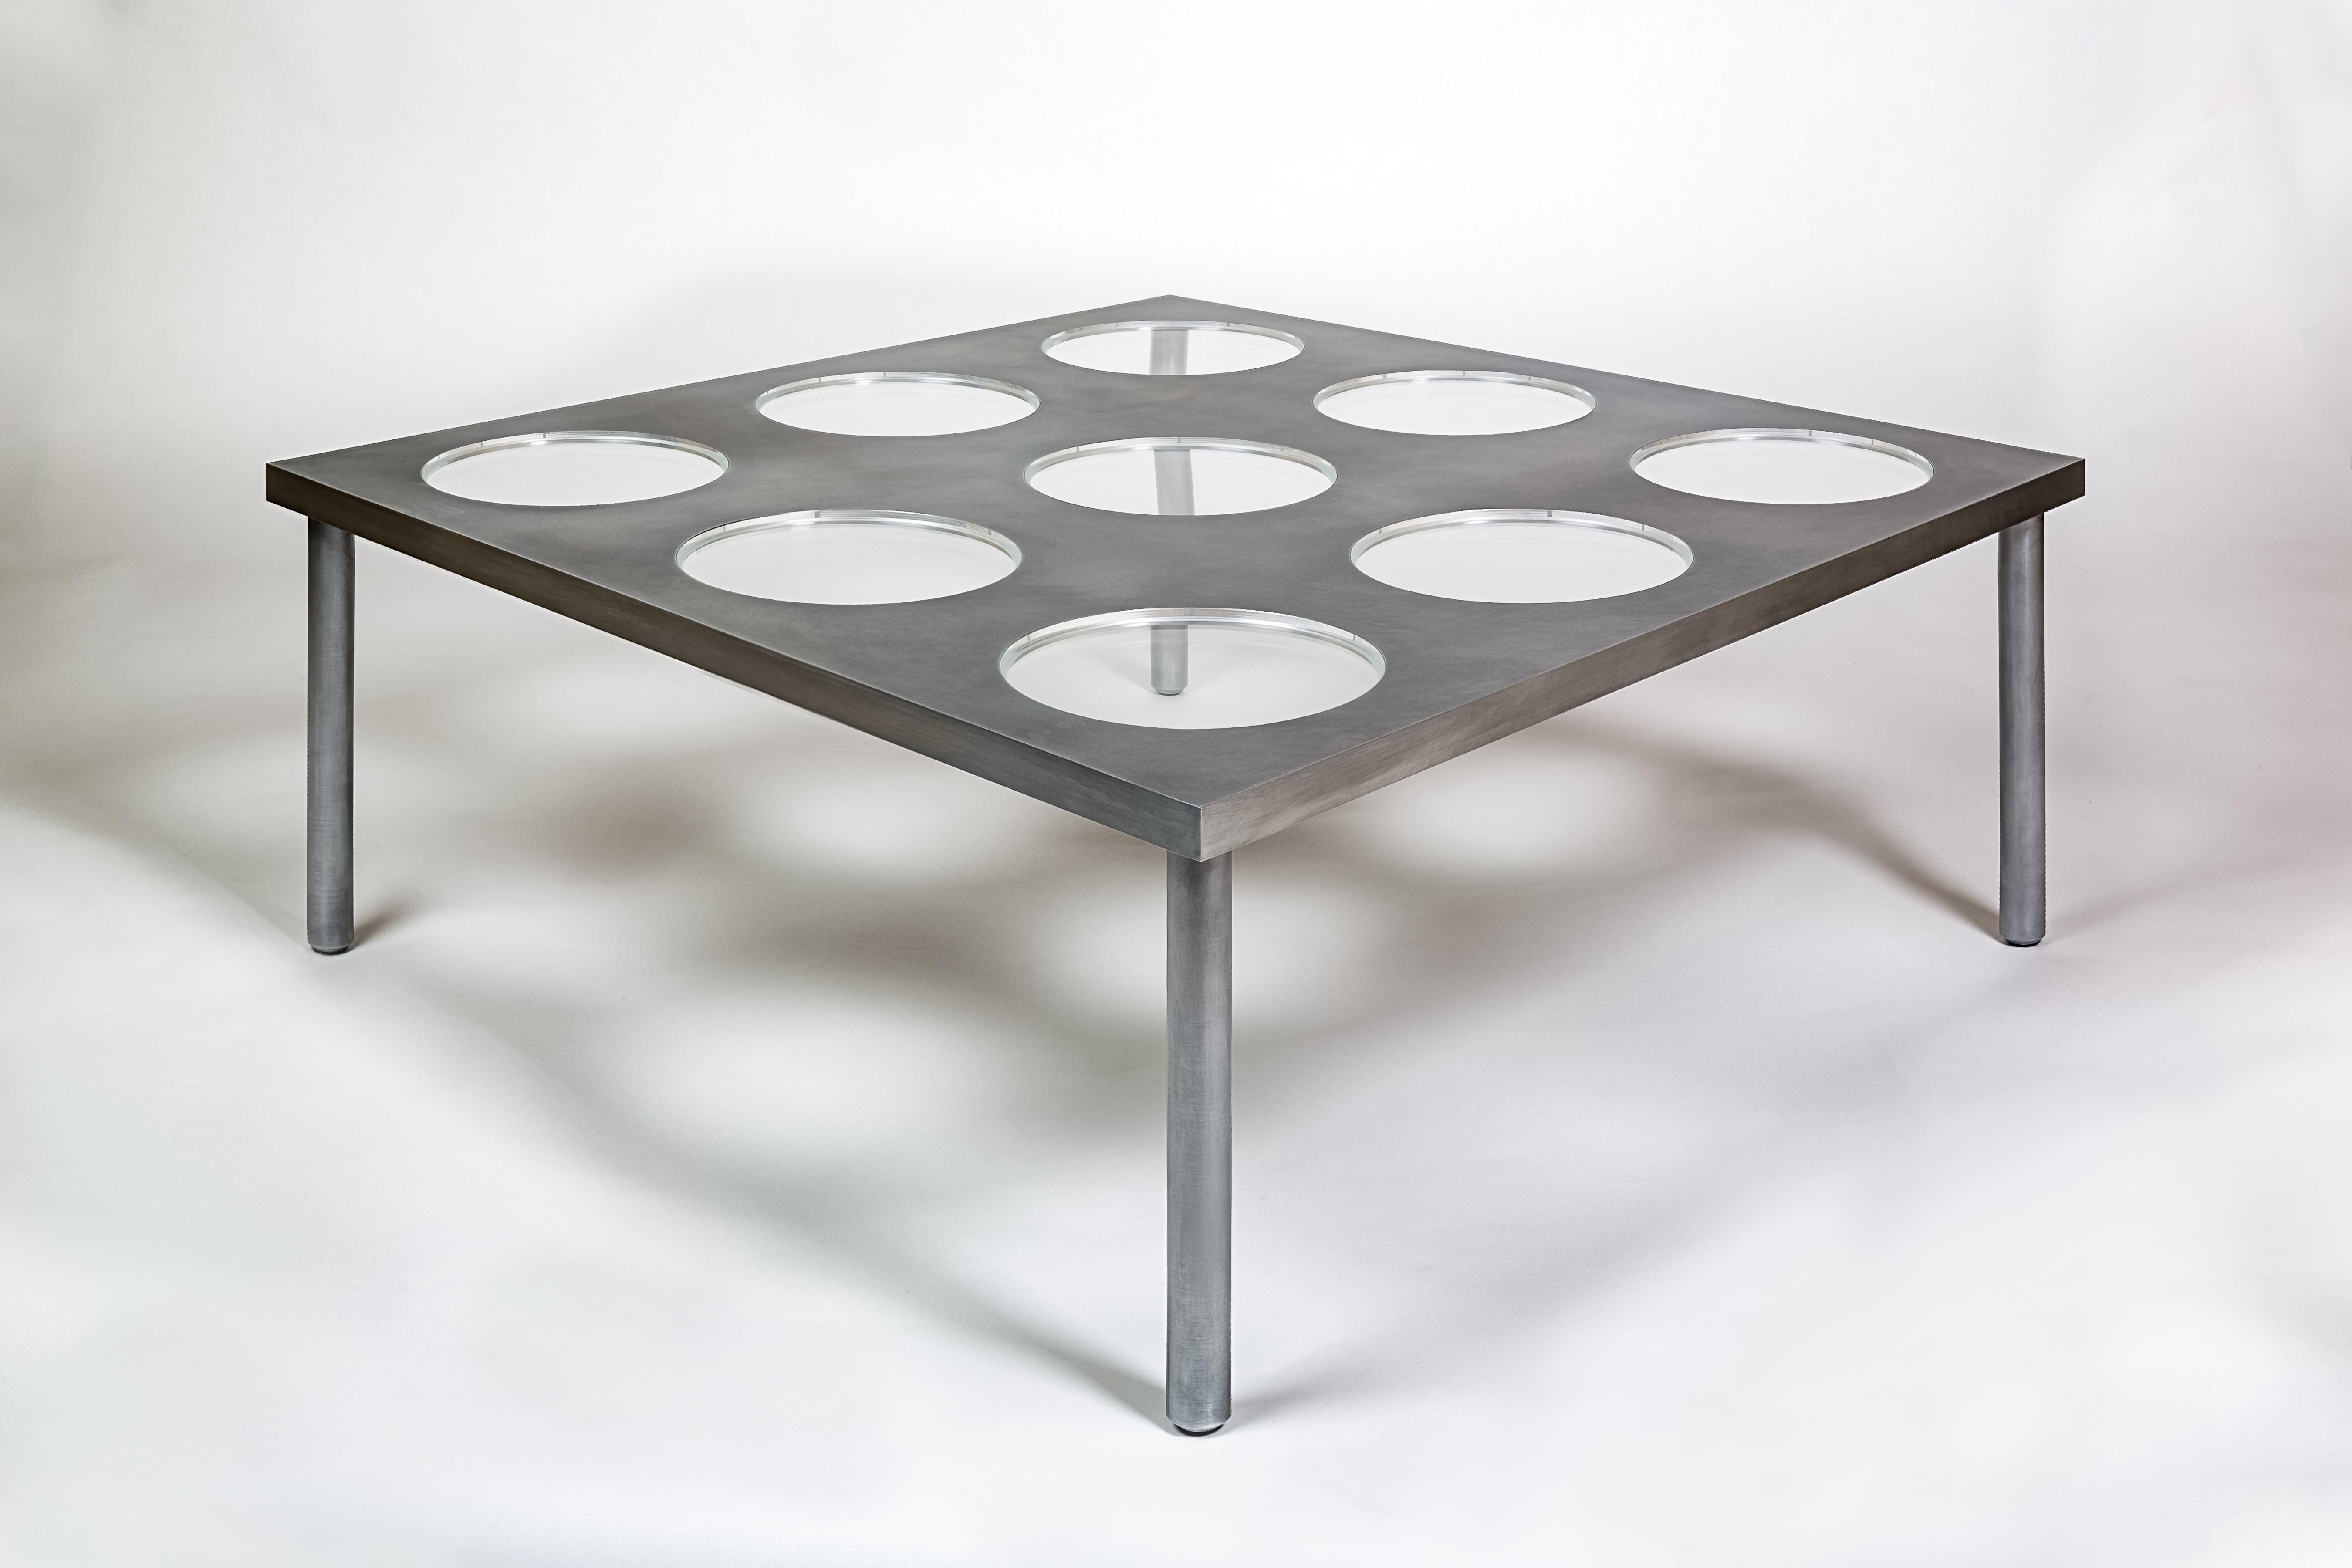 The Irwin table in solid, milled 1 inch thick aluminum top with precise milled and polished acrylic. The legs are 1 and a quarter inch diameter CNC-milled solid aluminum legs. The tabletop and legs are sanded, polished, and waxed. Variations